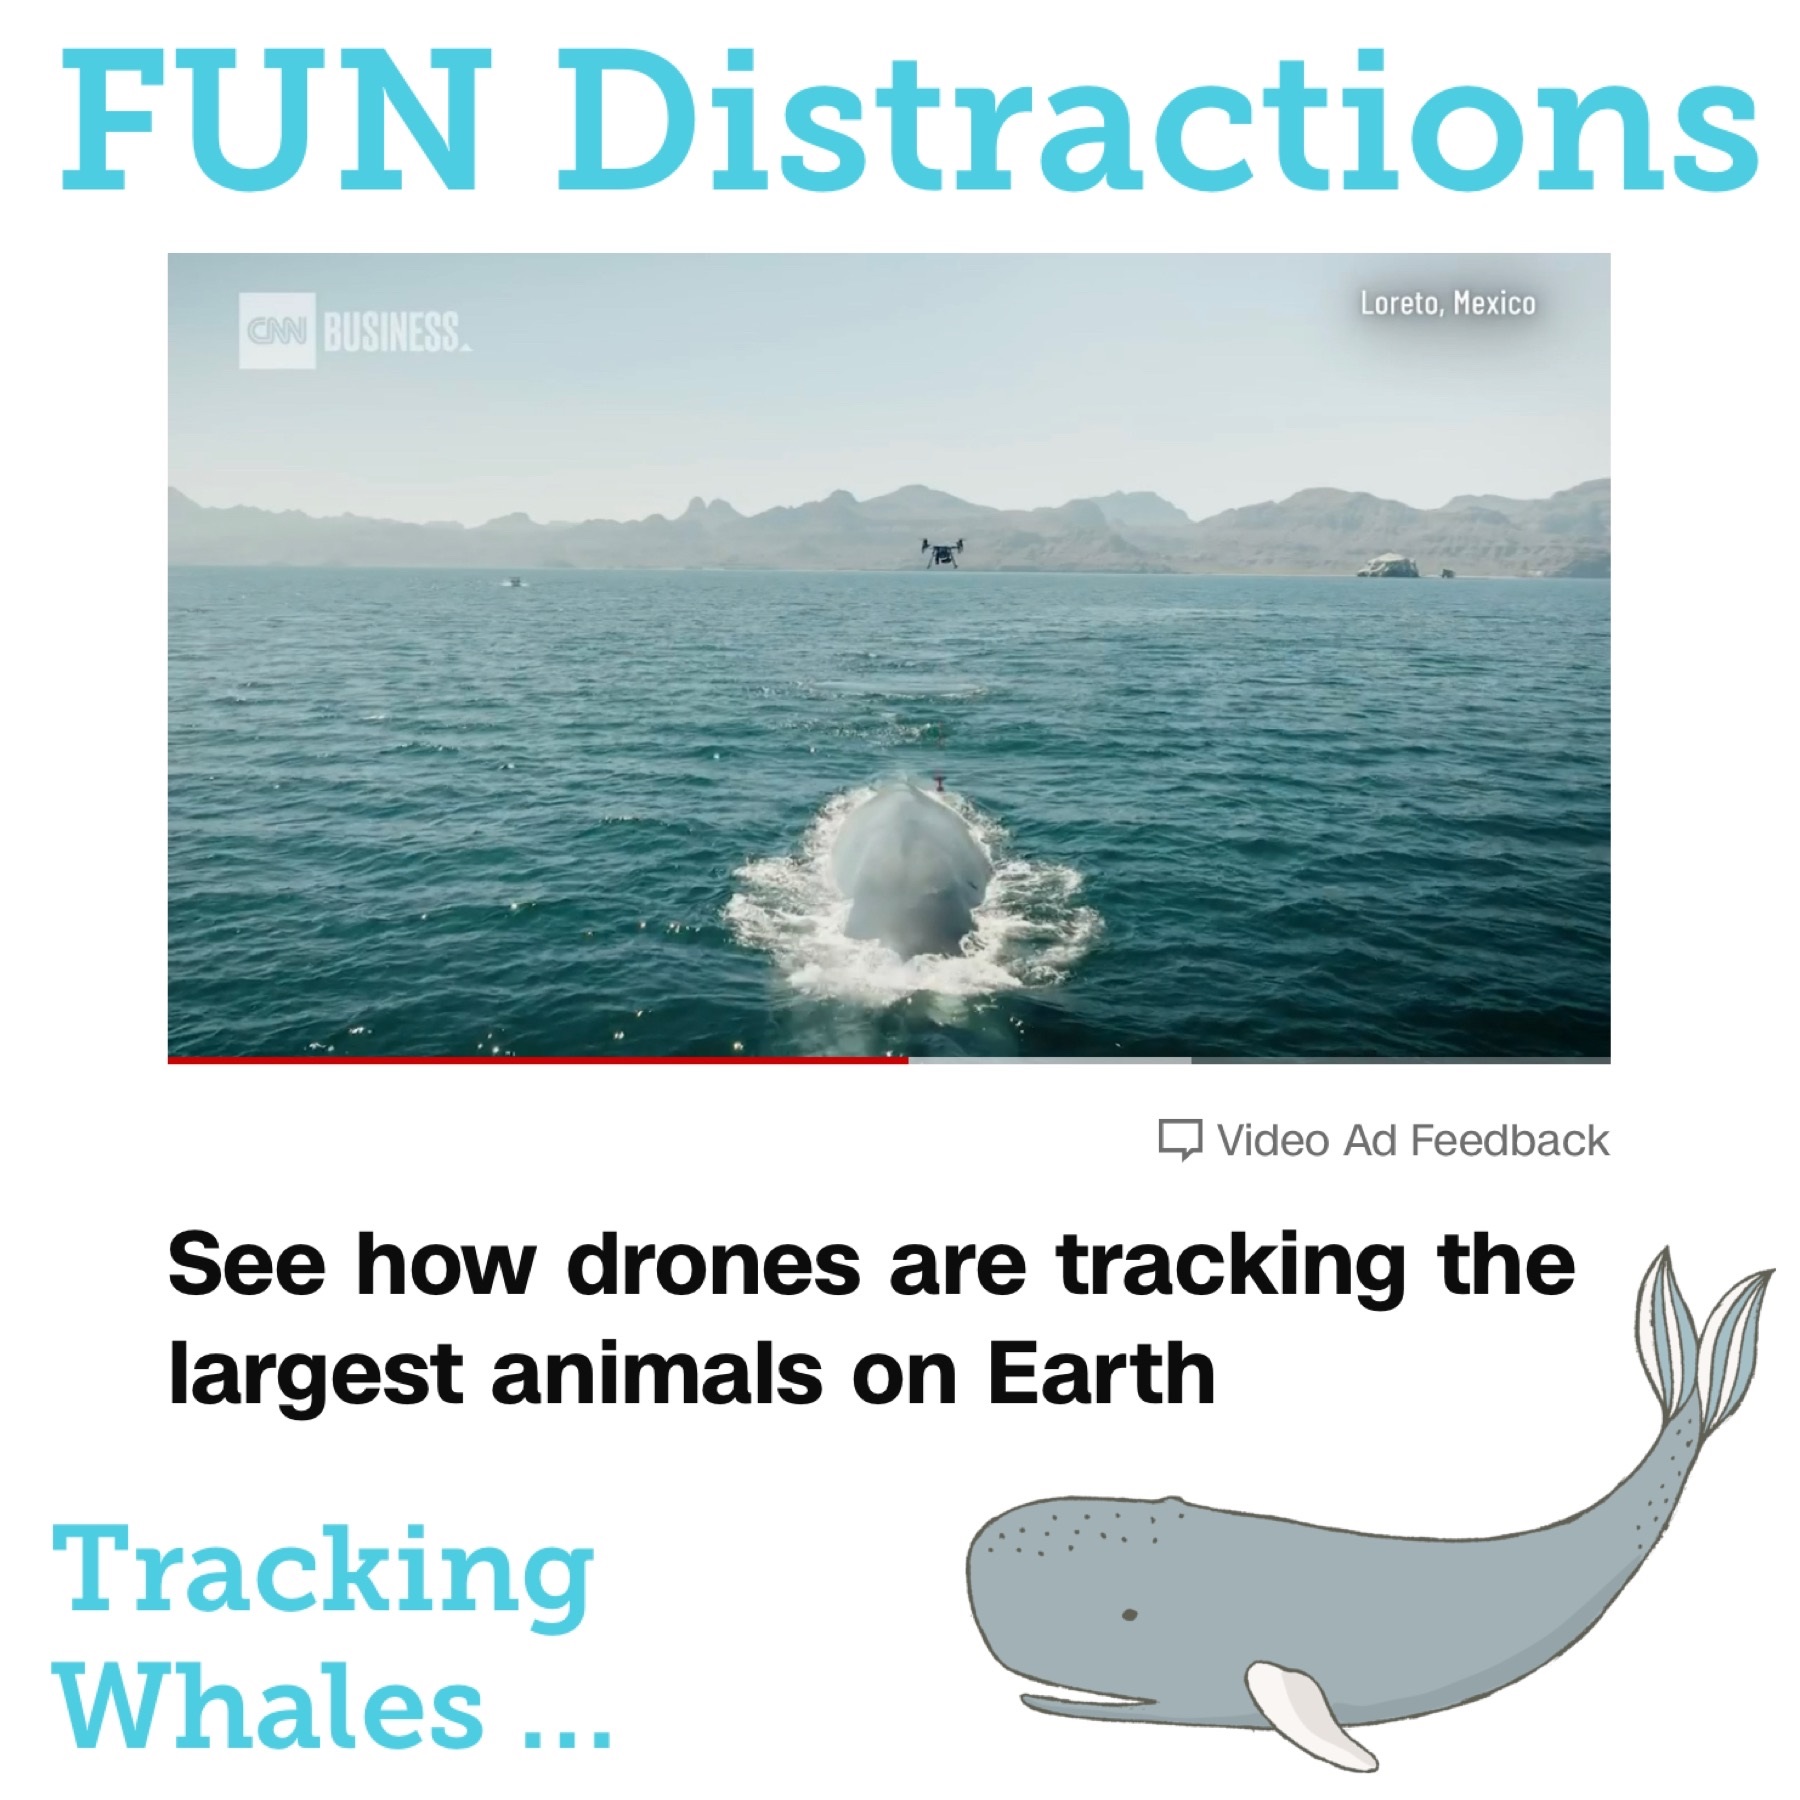 Image of a drone tracking a whale